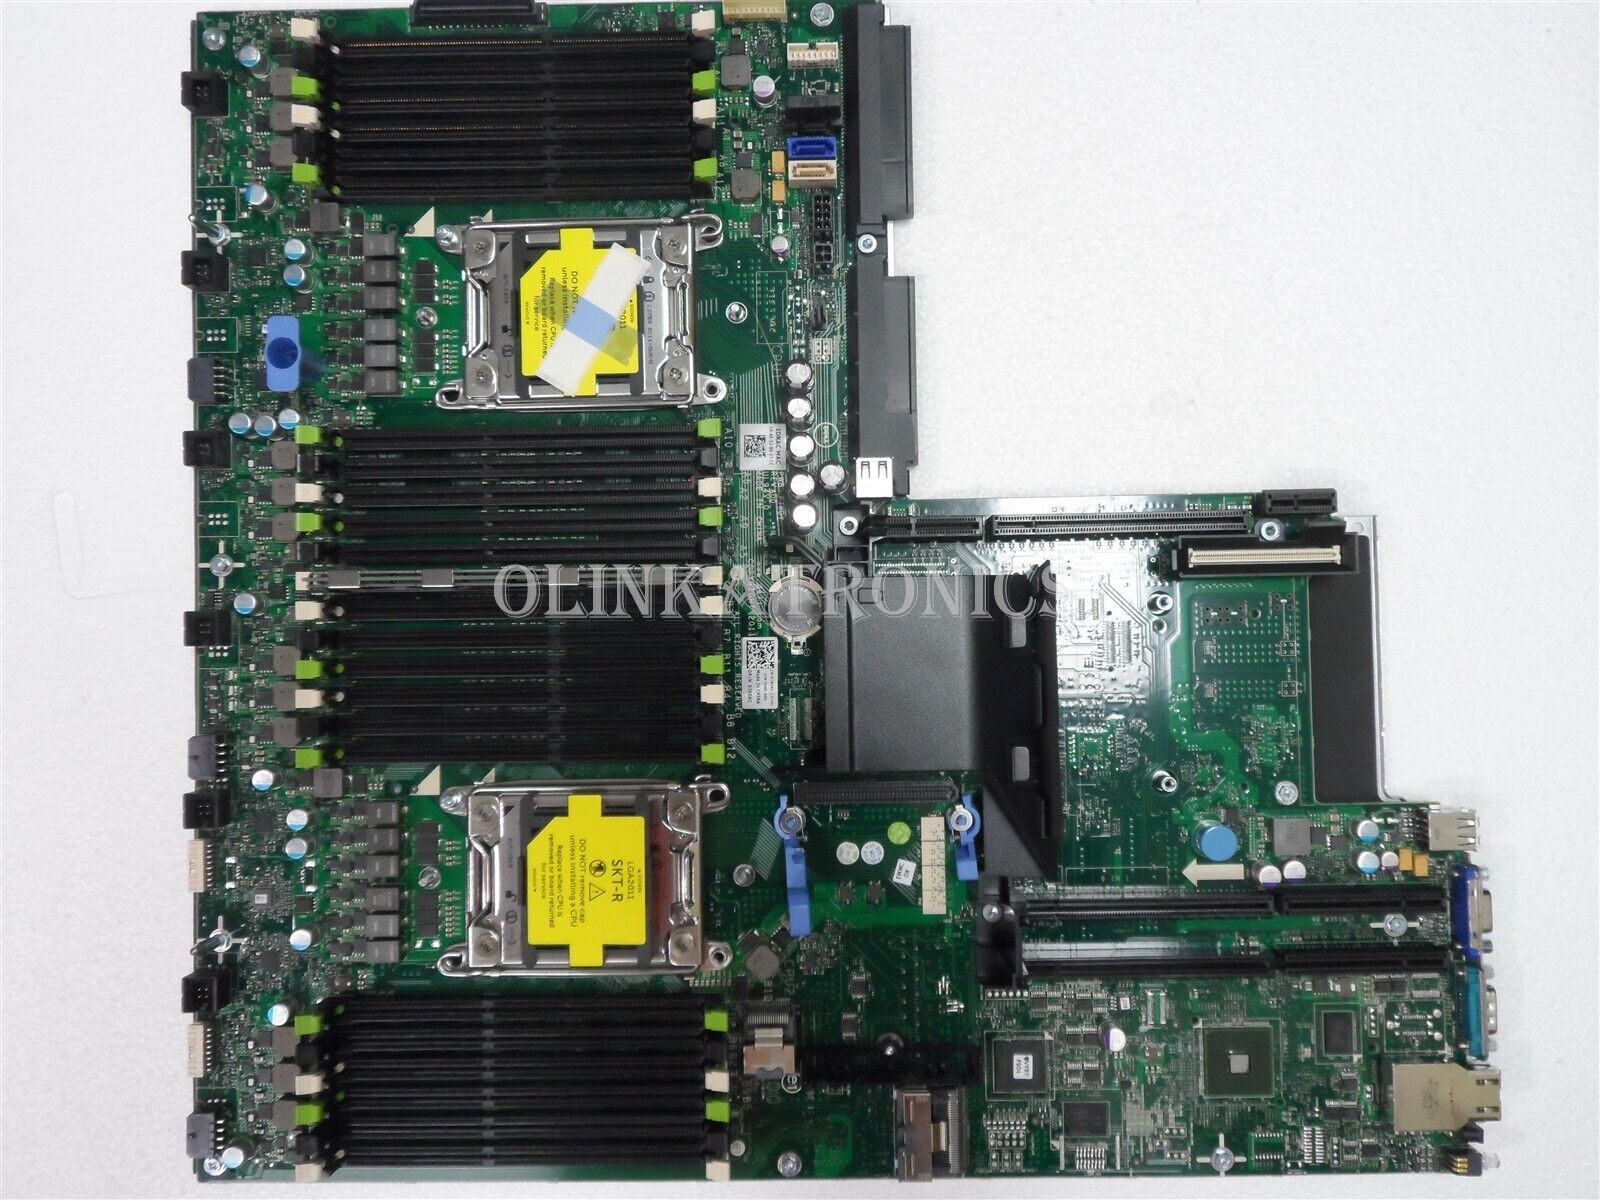 DELL POWEREDGE R720 R720xd OEMR MOTHERBOARD SYSTEM MAIN BOARD